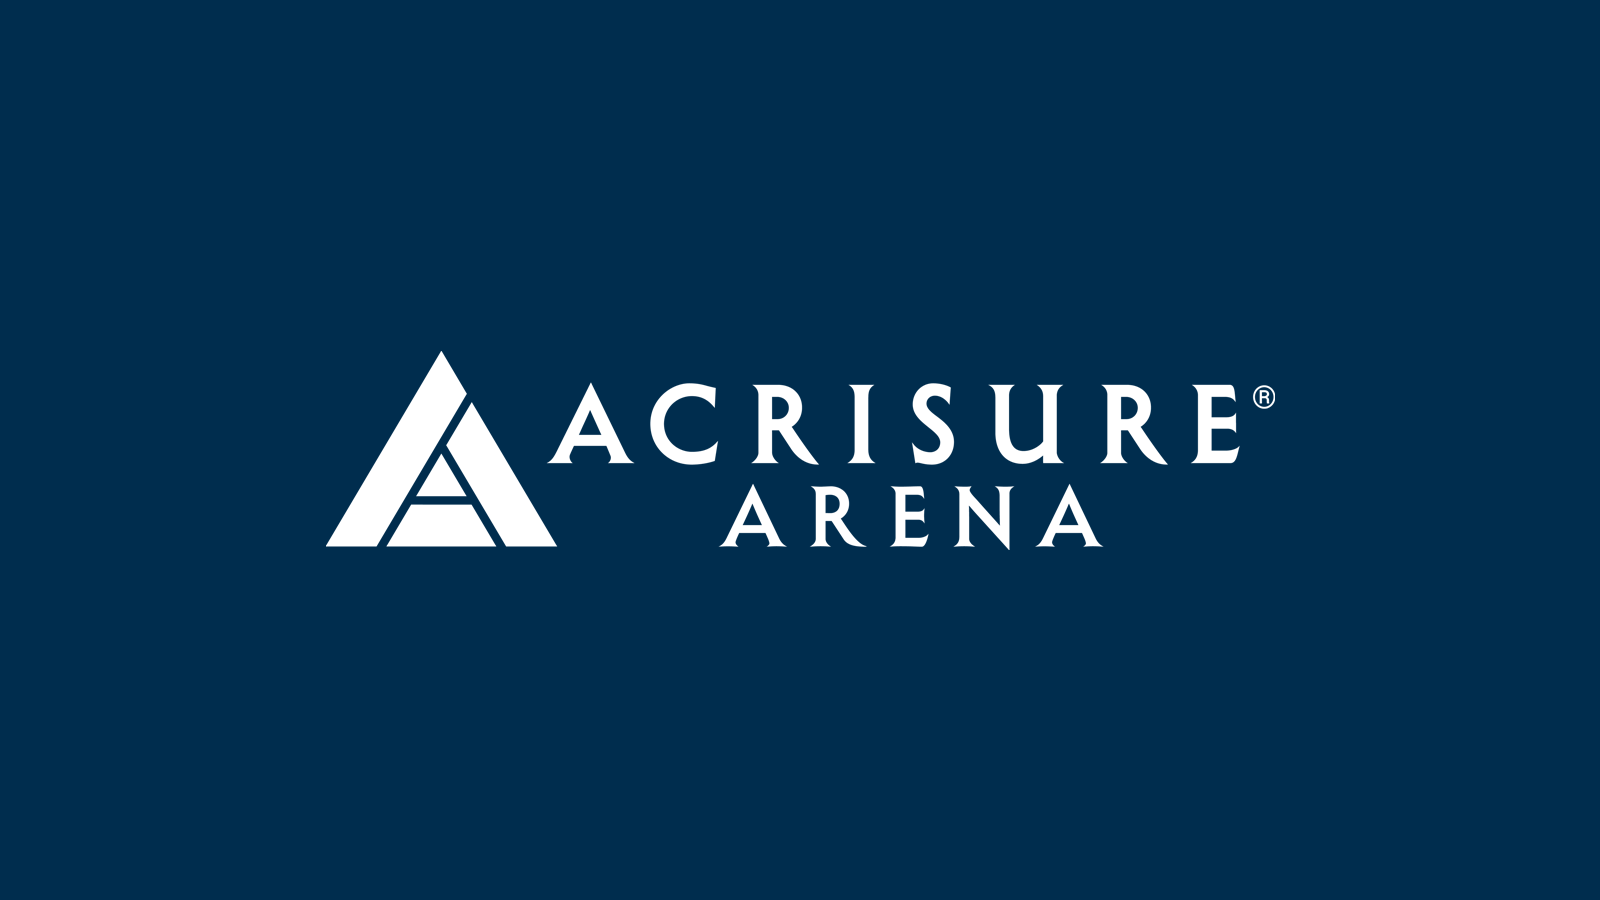 Patriot One Technologies Selected to Secure All Entrances at Oak View Group’s New Acrisure Arena in Greater Palm Springs, Home of the Coachella Valley Firebirds